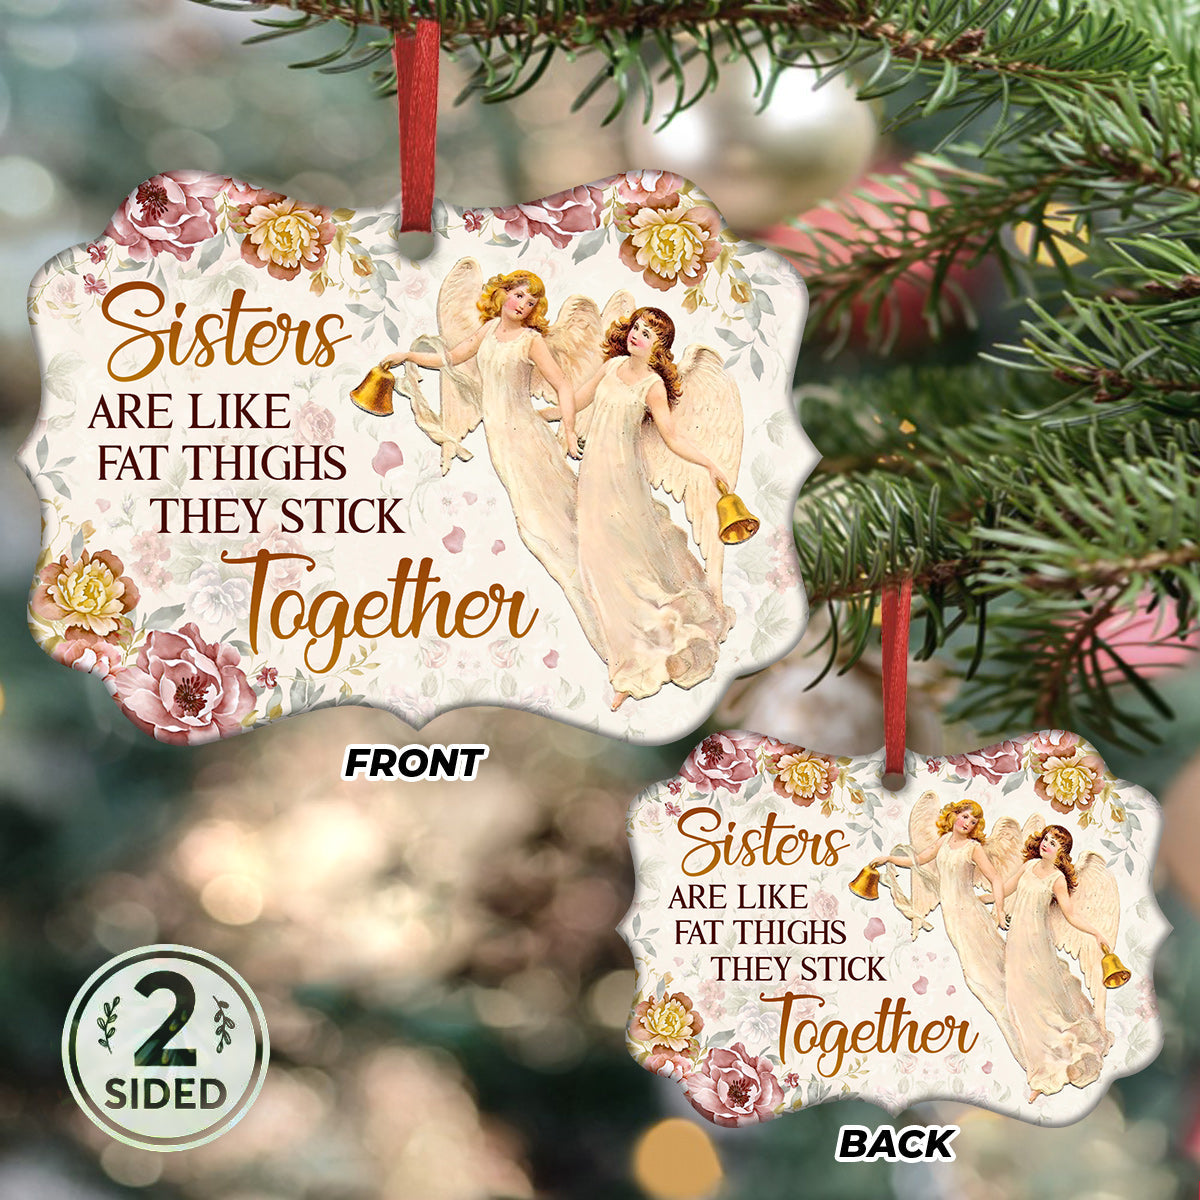 Sister Angel Sisters Are Like Fat Thighs Stick Together Metal Ornament - Christmas Ornament - Christmas Gift